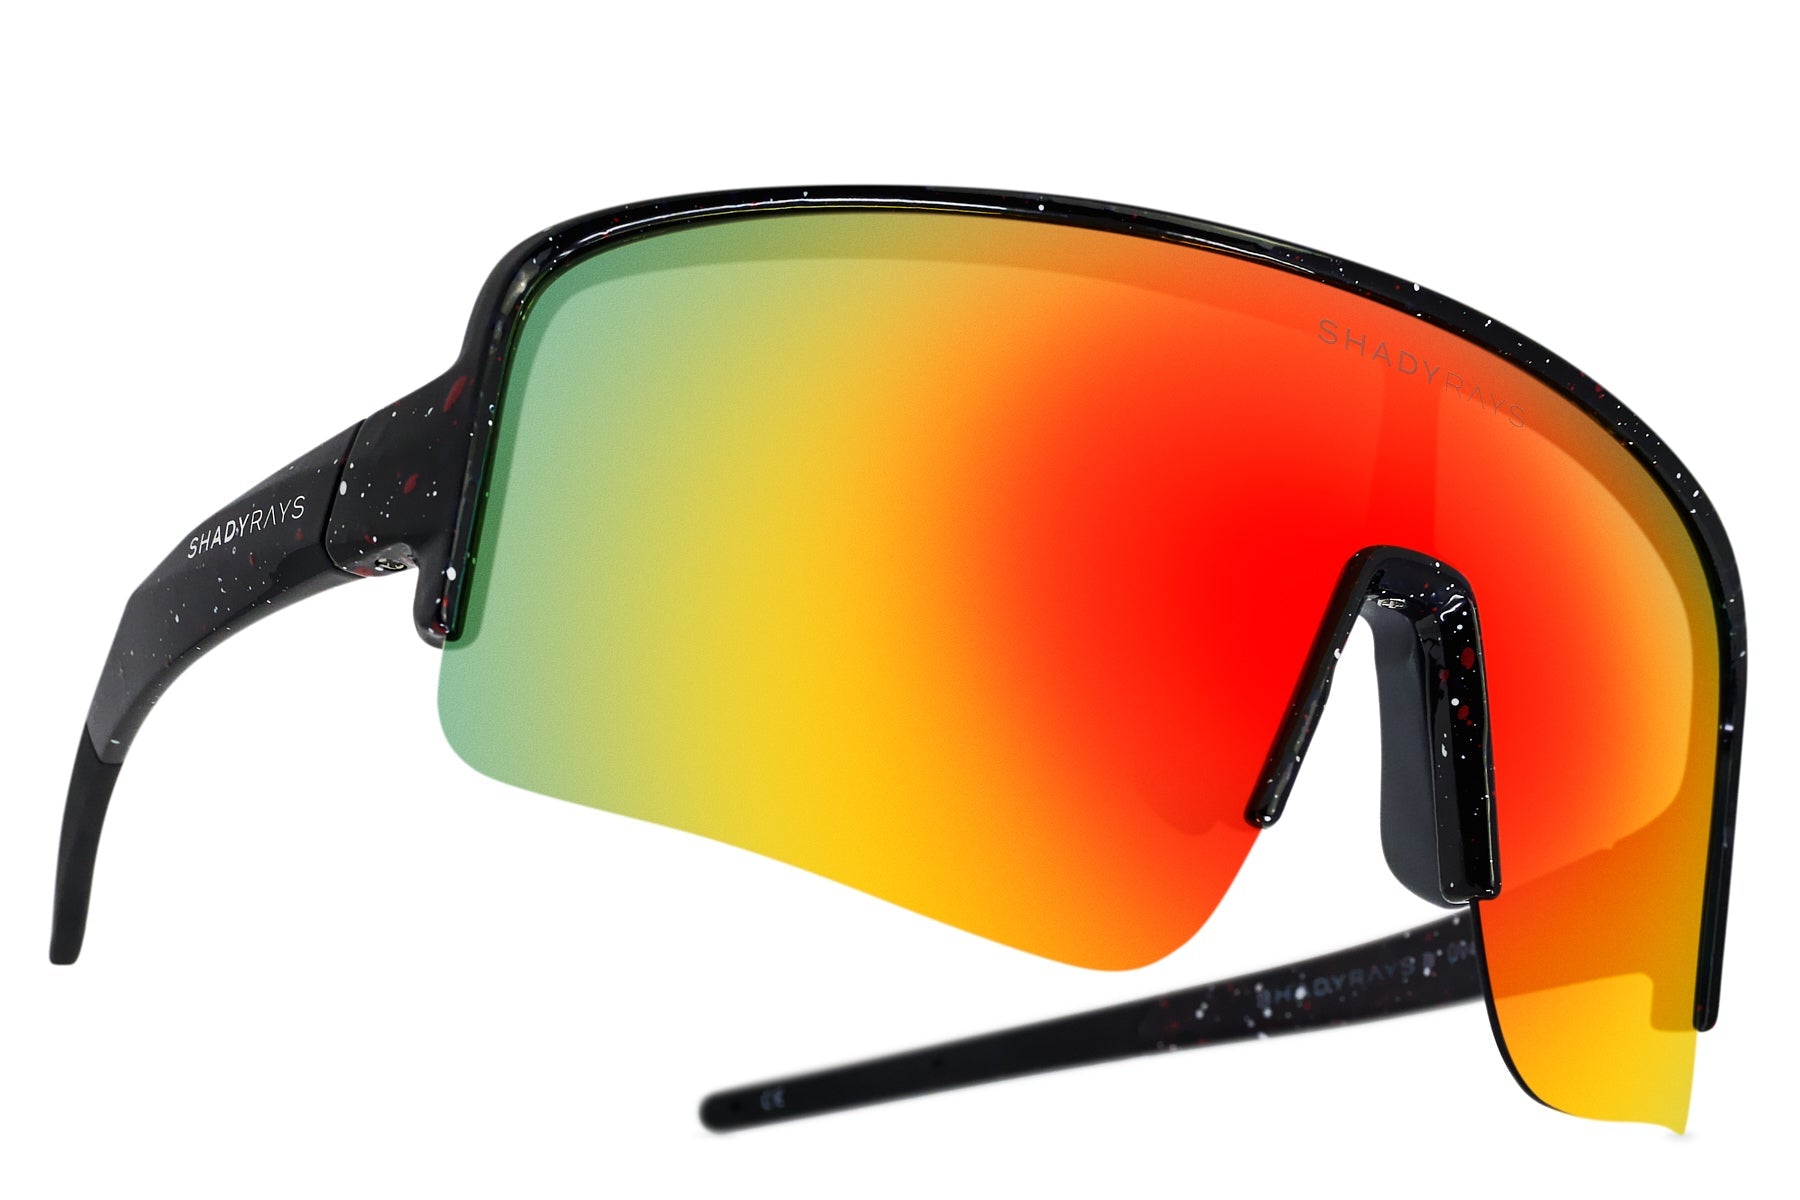 Details more than 150 about polarized sunglasses best